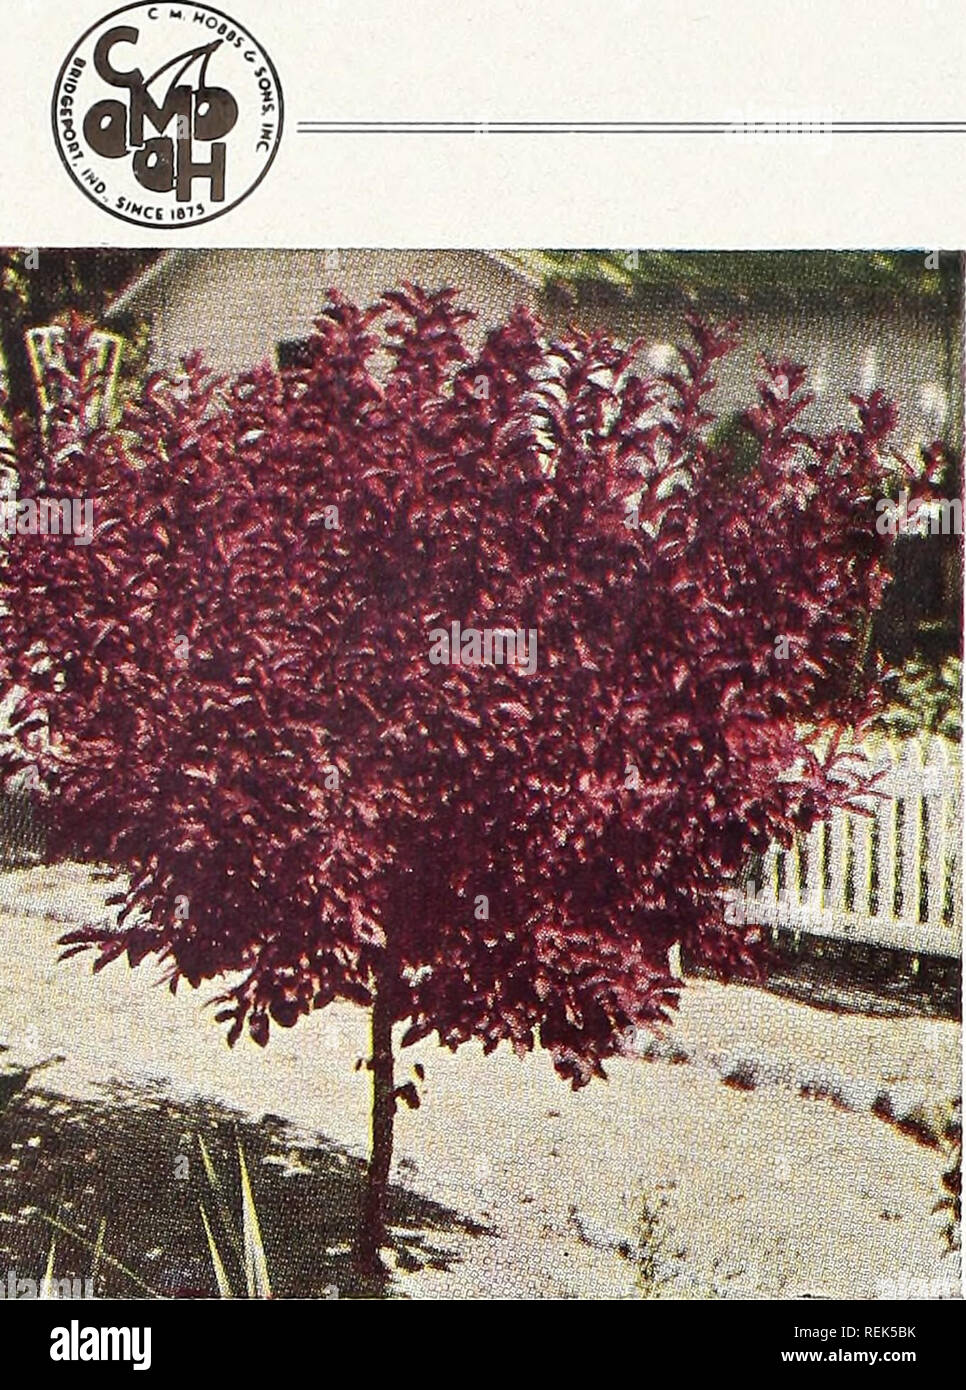 . C. M. Hobbs &amp; Sons Incorporated. Nurseries Horticulture Catalogs; Evergreens Catalogs; Fruit trees Catalogs; Climbing plants Catalogs; Shrubs Catalogs; Vegetables Catalogs. Oak - Quercus Burr Oak (Q. macrocarpa). A slow growing Oak with thick bark and heavy dark green foliage. An unusual tree. English Oak (Q. robur). Very symmetrical upright tree of compact dense rich green planting on the lawn. foliage. Fine as specimen Pin Oak (Q. palustris). One of the finest and most grace- ful as well as beautiful of all the shade trees. Very sym- metrical, the branches grow horizontally from a cent Stock Photo